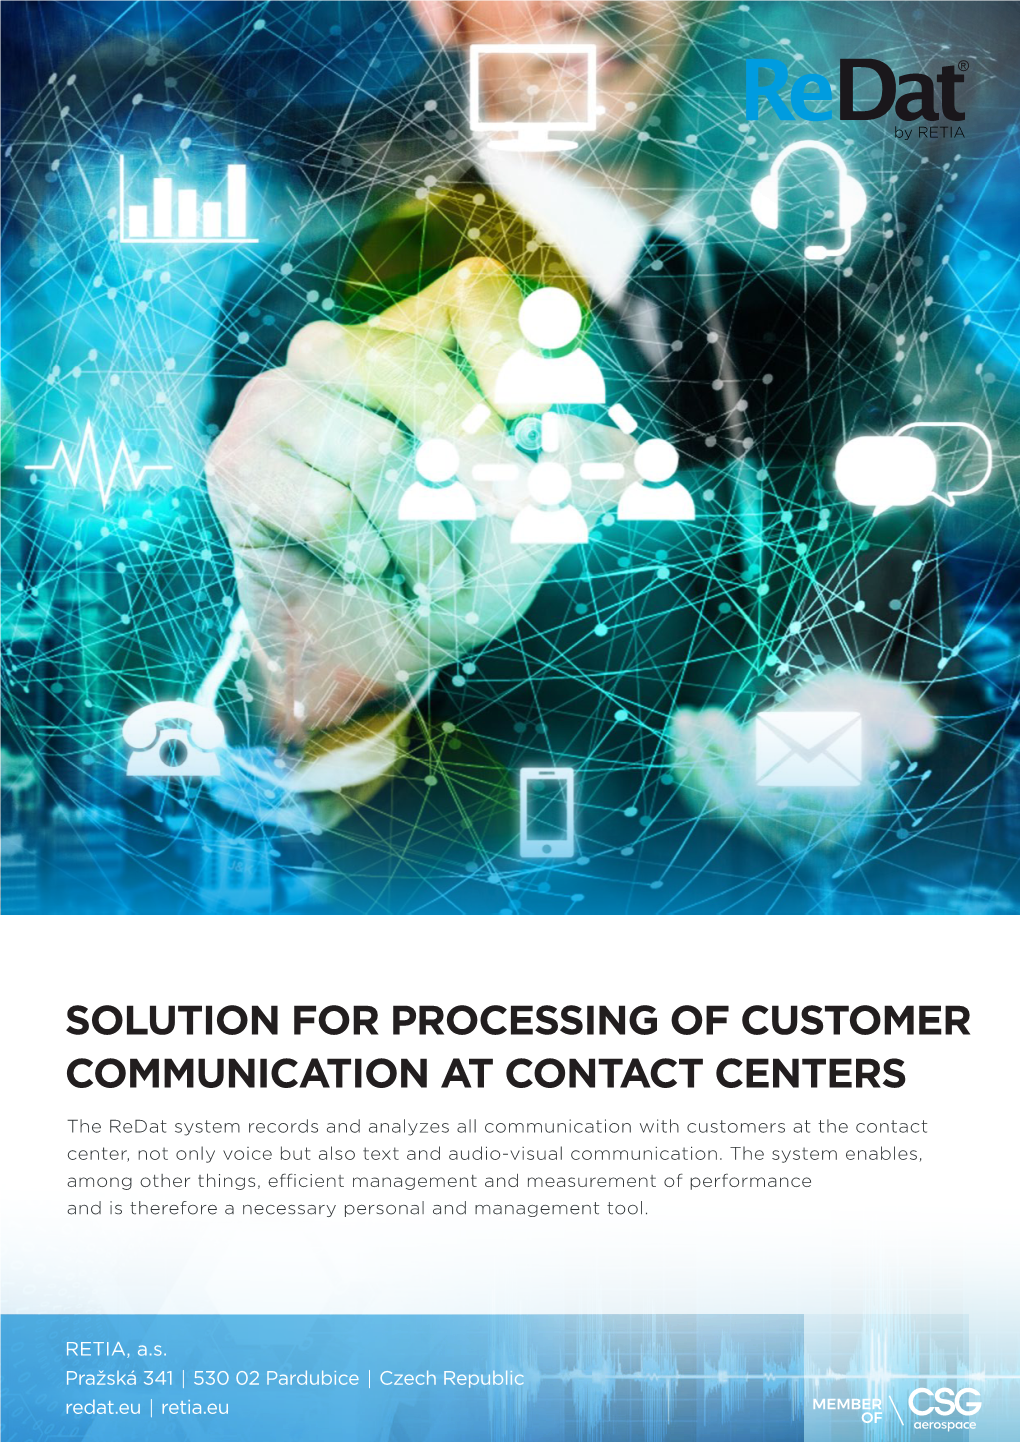 Solution for Processing of Customer Communication at Contact Centers